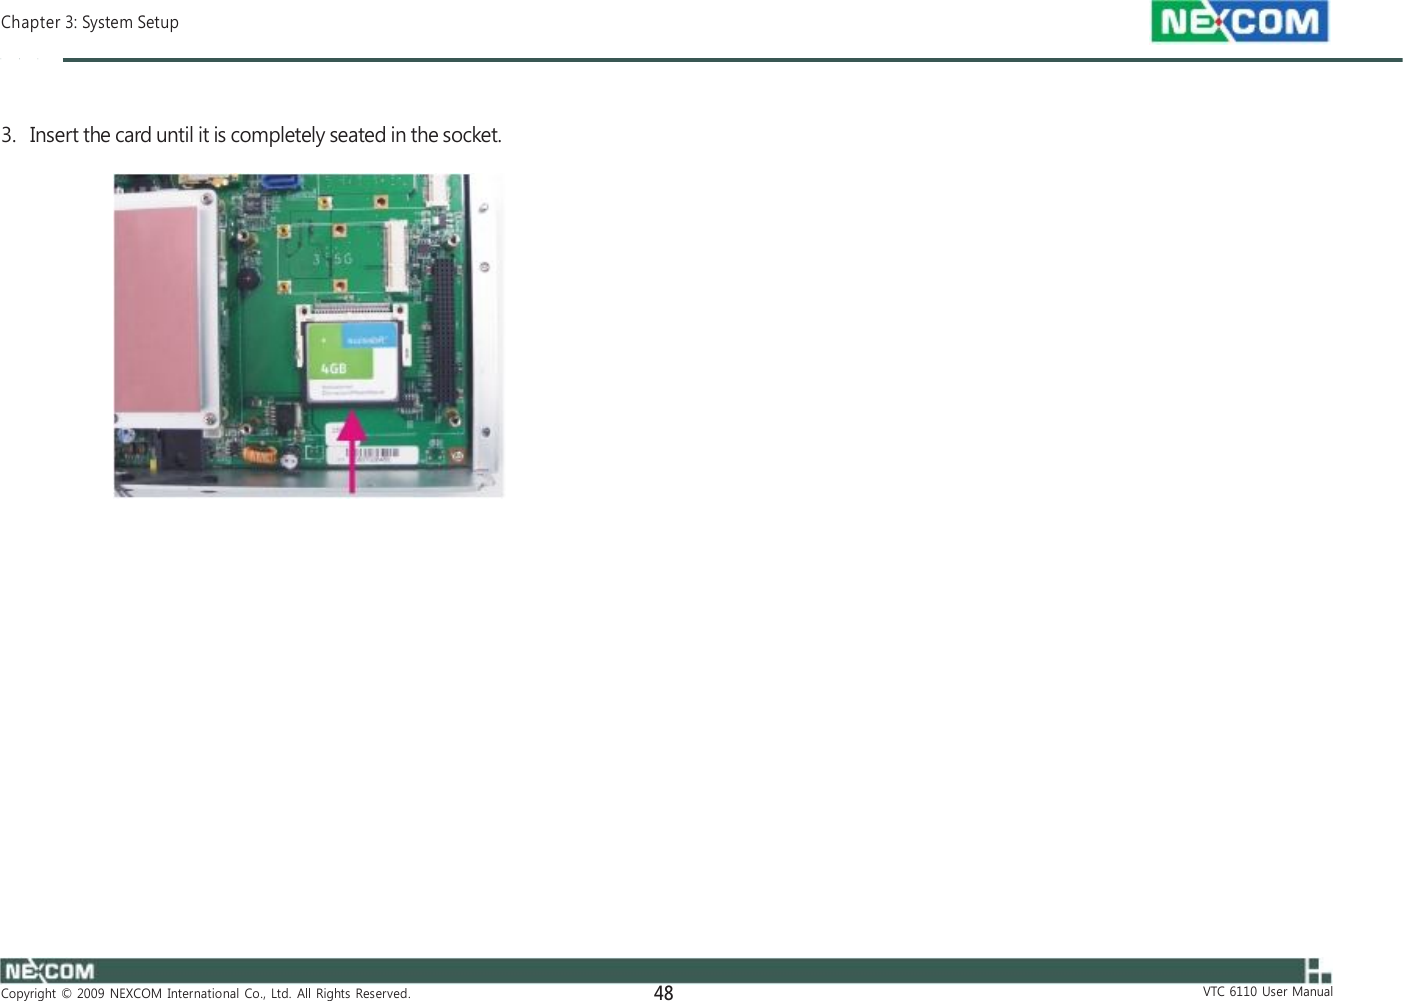  Chapter 3: System Setup    3.   Insert the card until it is completely seated in the socket.                                  Copyright  ©  2009  NEXCOM  International  Co.,  Ltd.  All  Rights  Reserved. 48                                  VTC  6110  User  Manual 